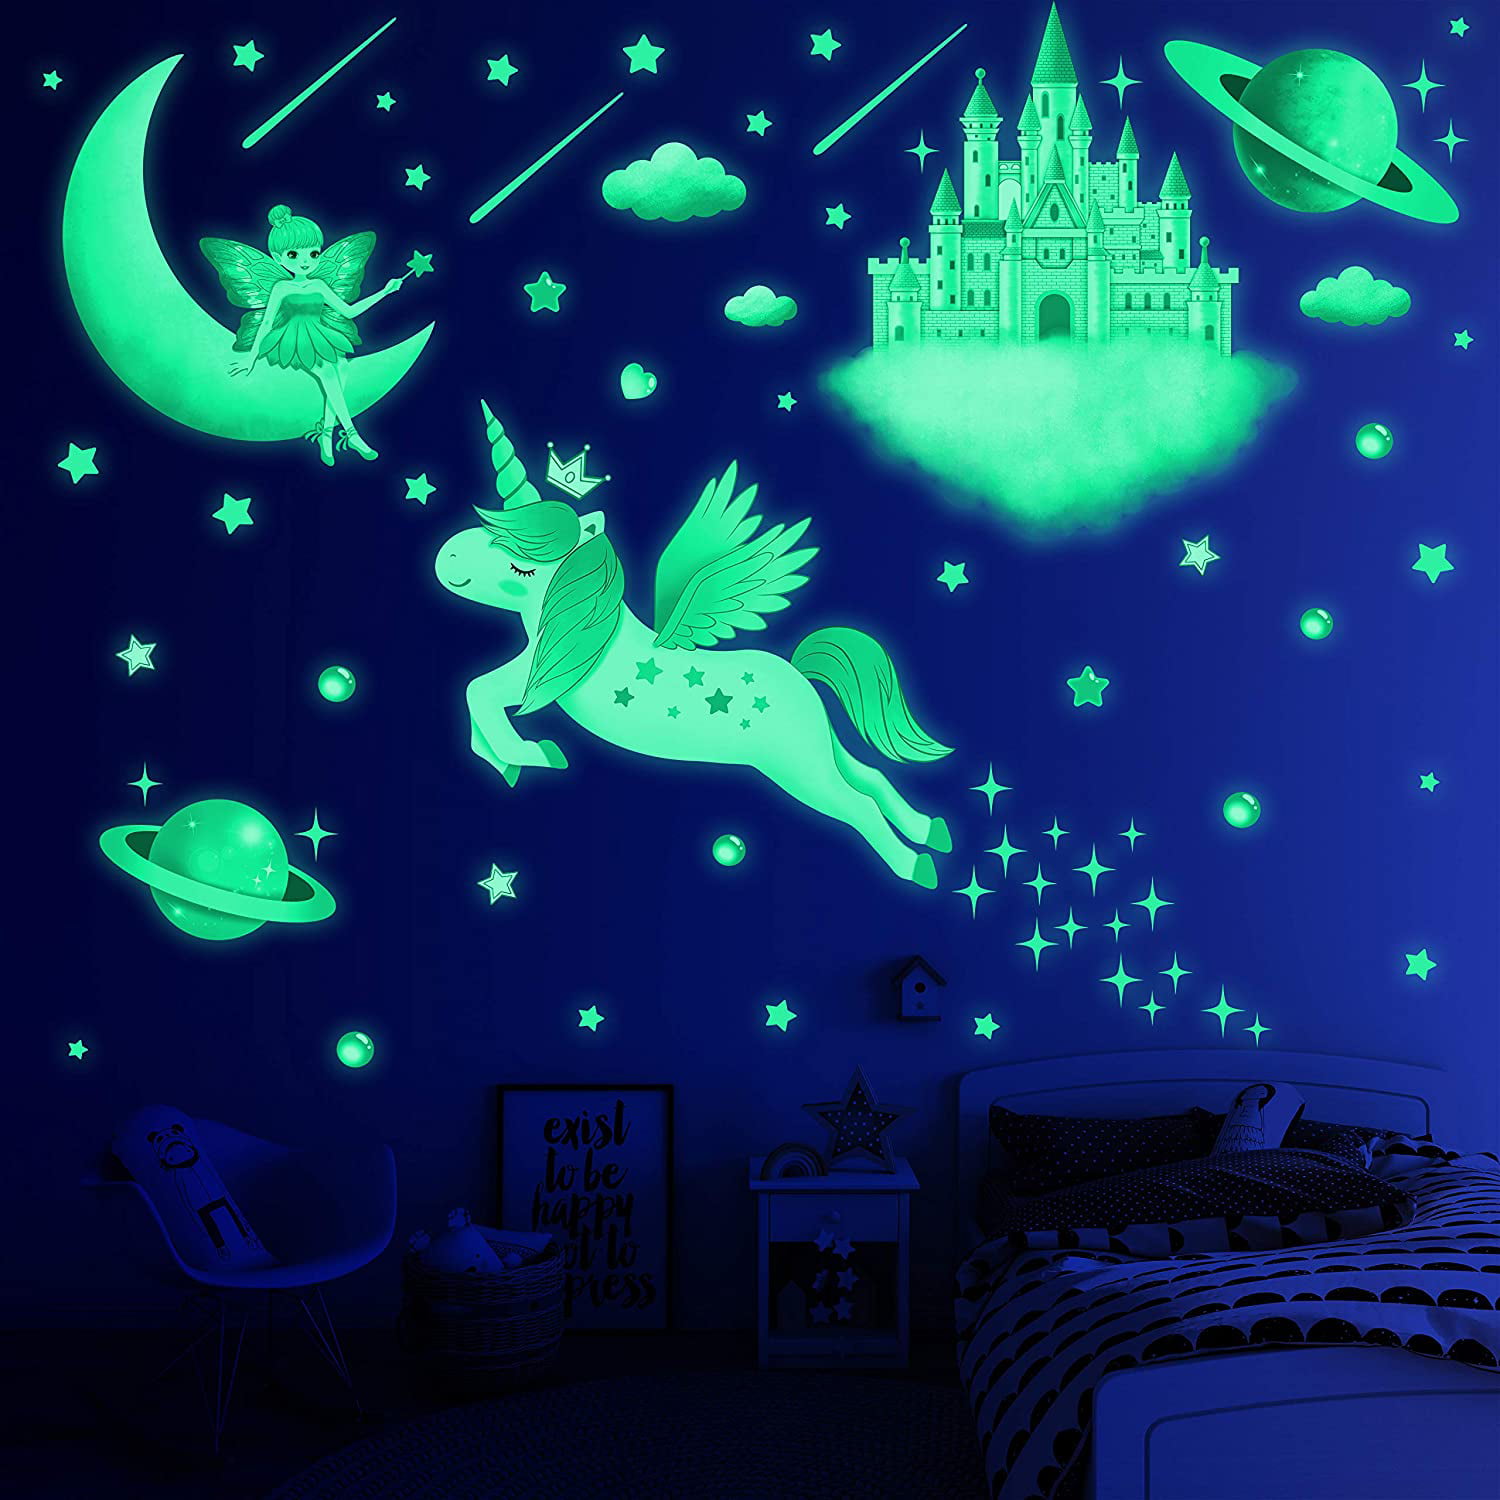 Wall Stickers Colorful Stars Ceiling Decoration Children's Bedroom Decoration ANSMIO Luminous Stickers 100pcs Glowing Stars and Moon Glowing Stars at Night with Lights Off Fluorescent Stickers